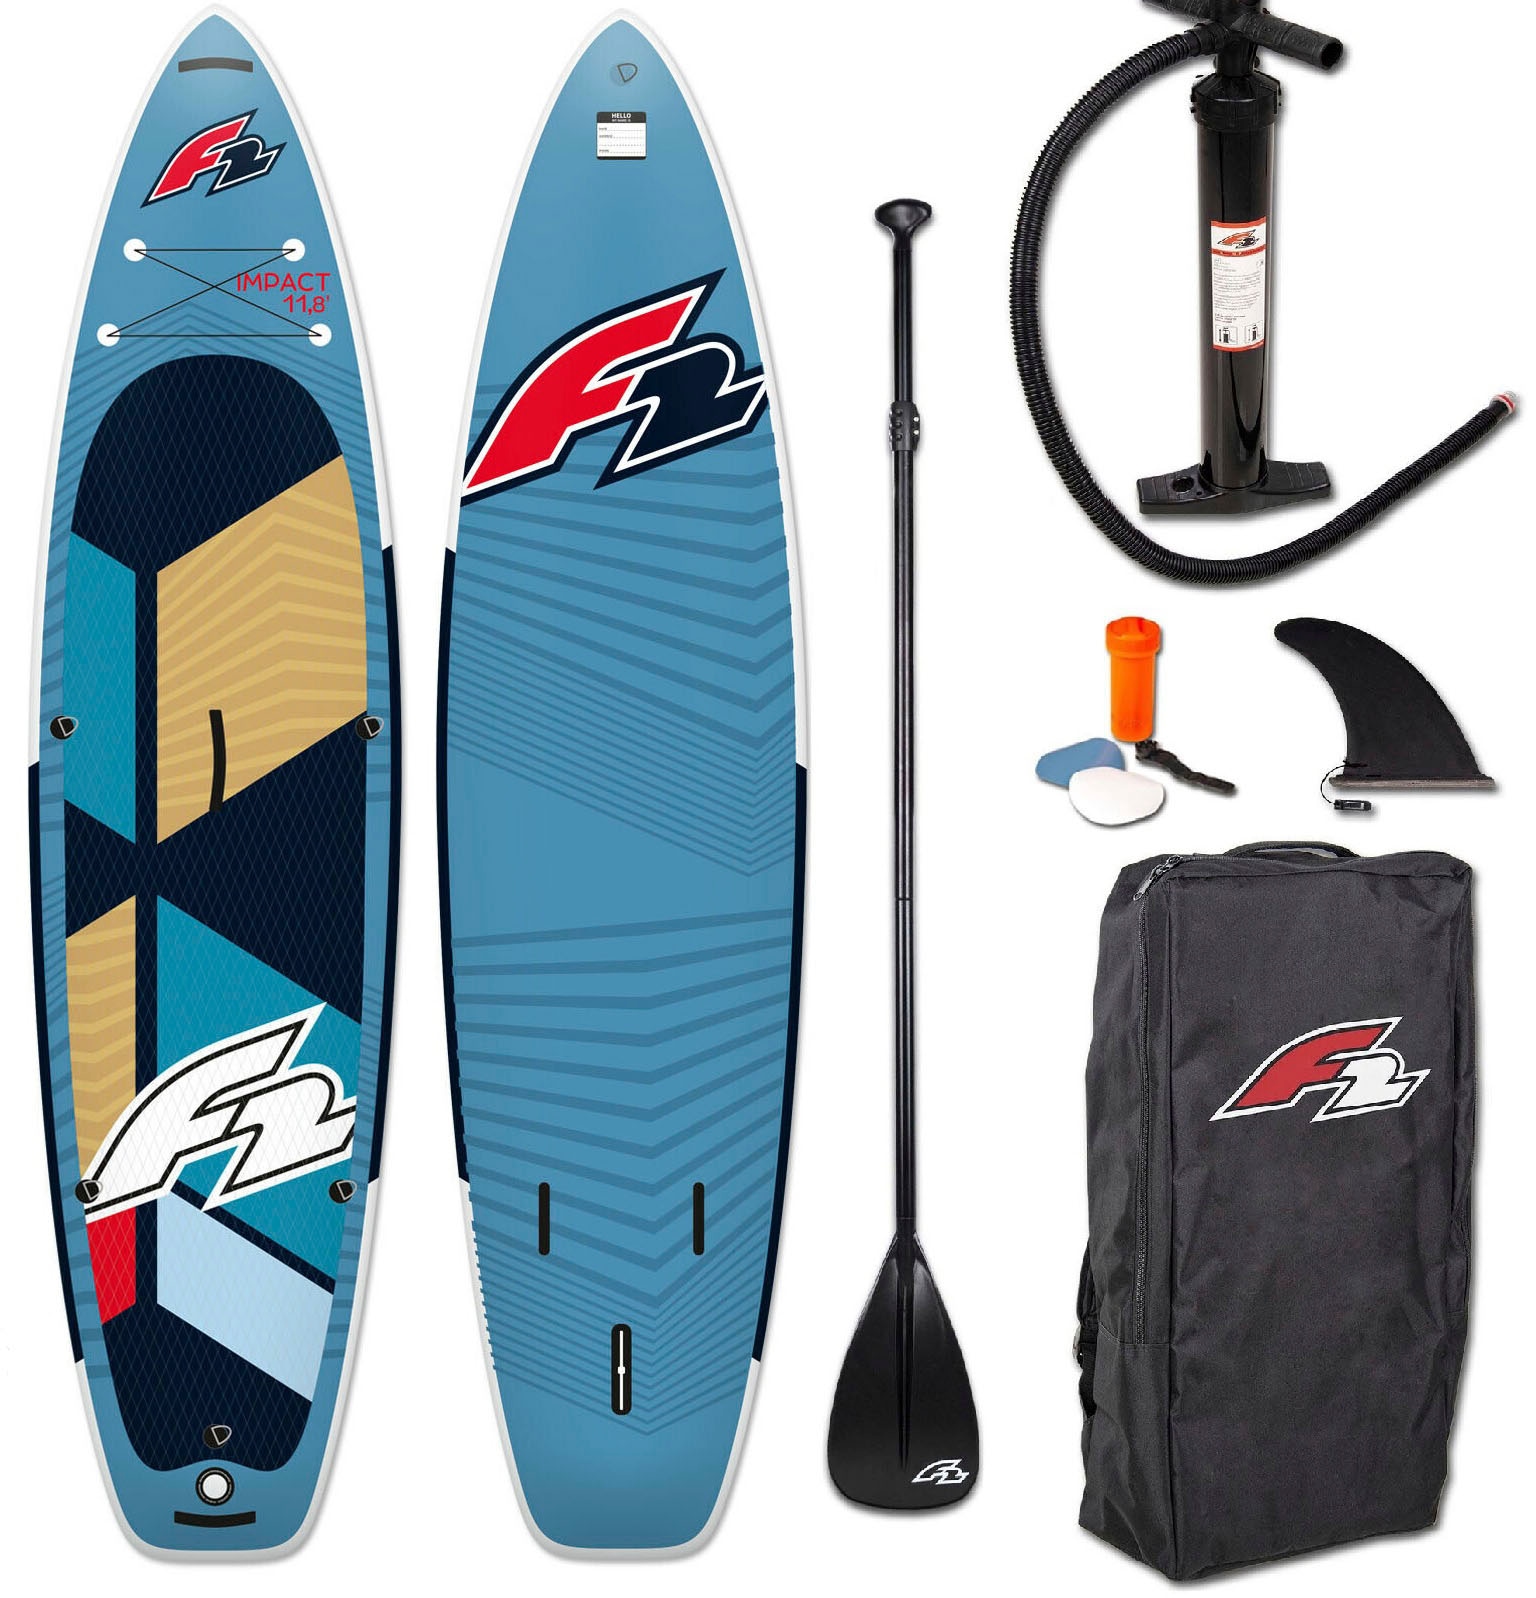 F2 Inflatable SUP-Board im Shop tlg.) »Impact turquoise 10,8«, (Packung, Online OTTO 5